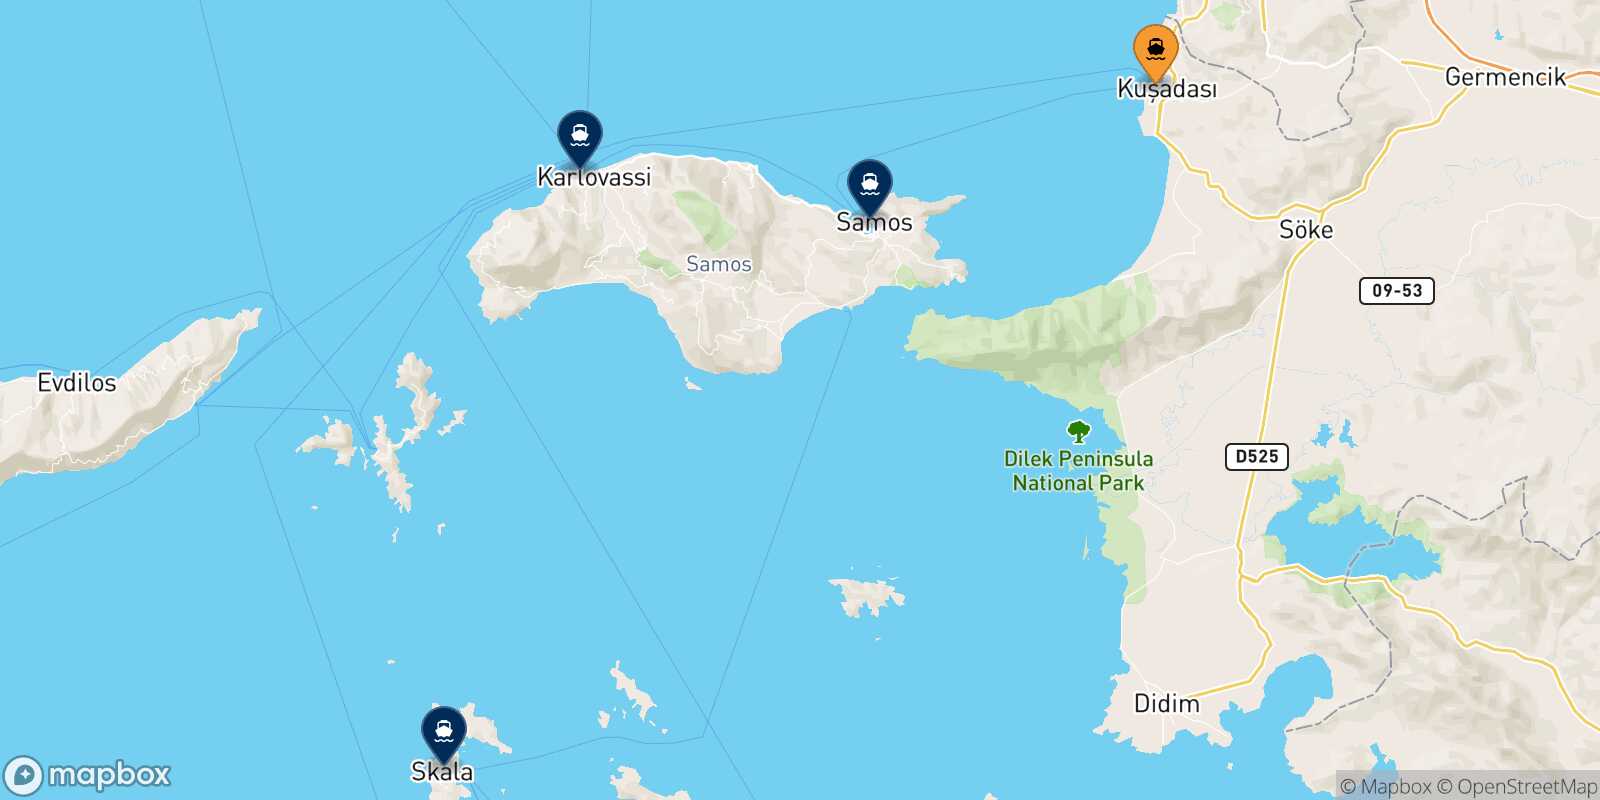 Map of the destinations reachable from Kusadasi